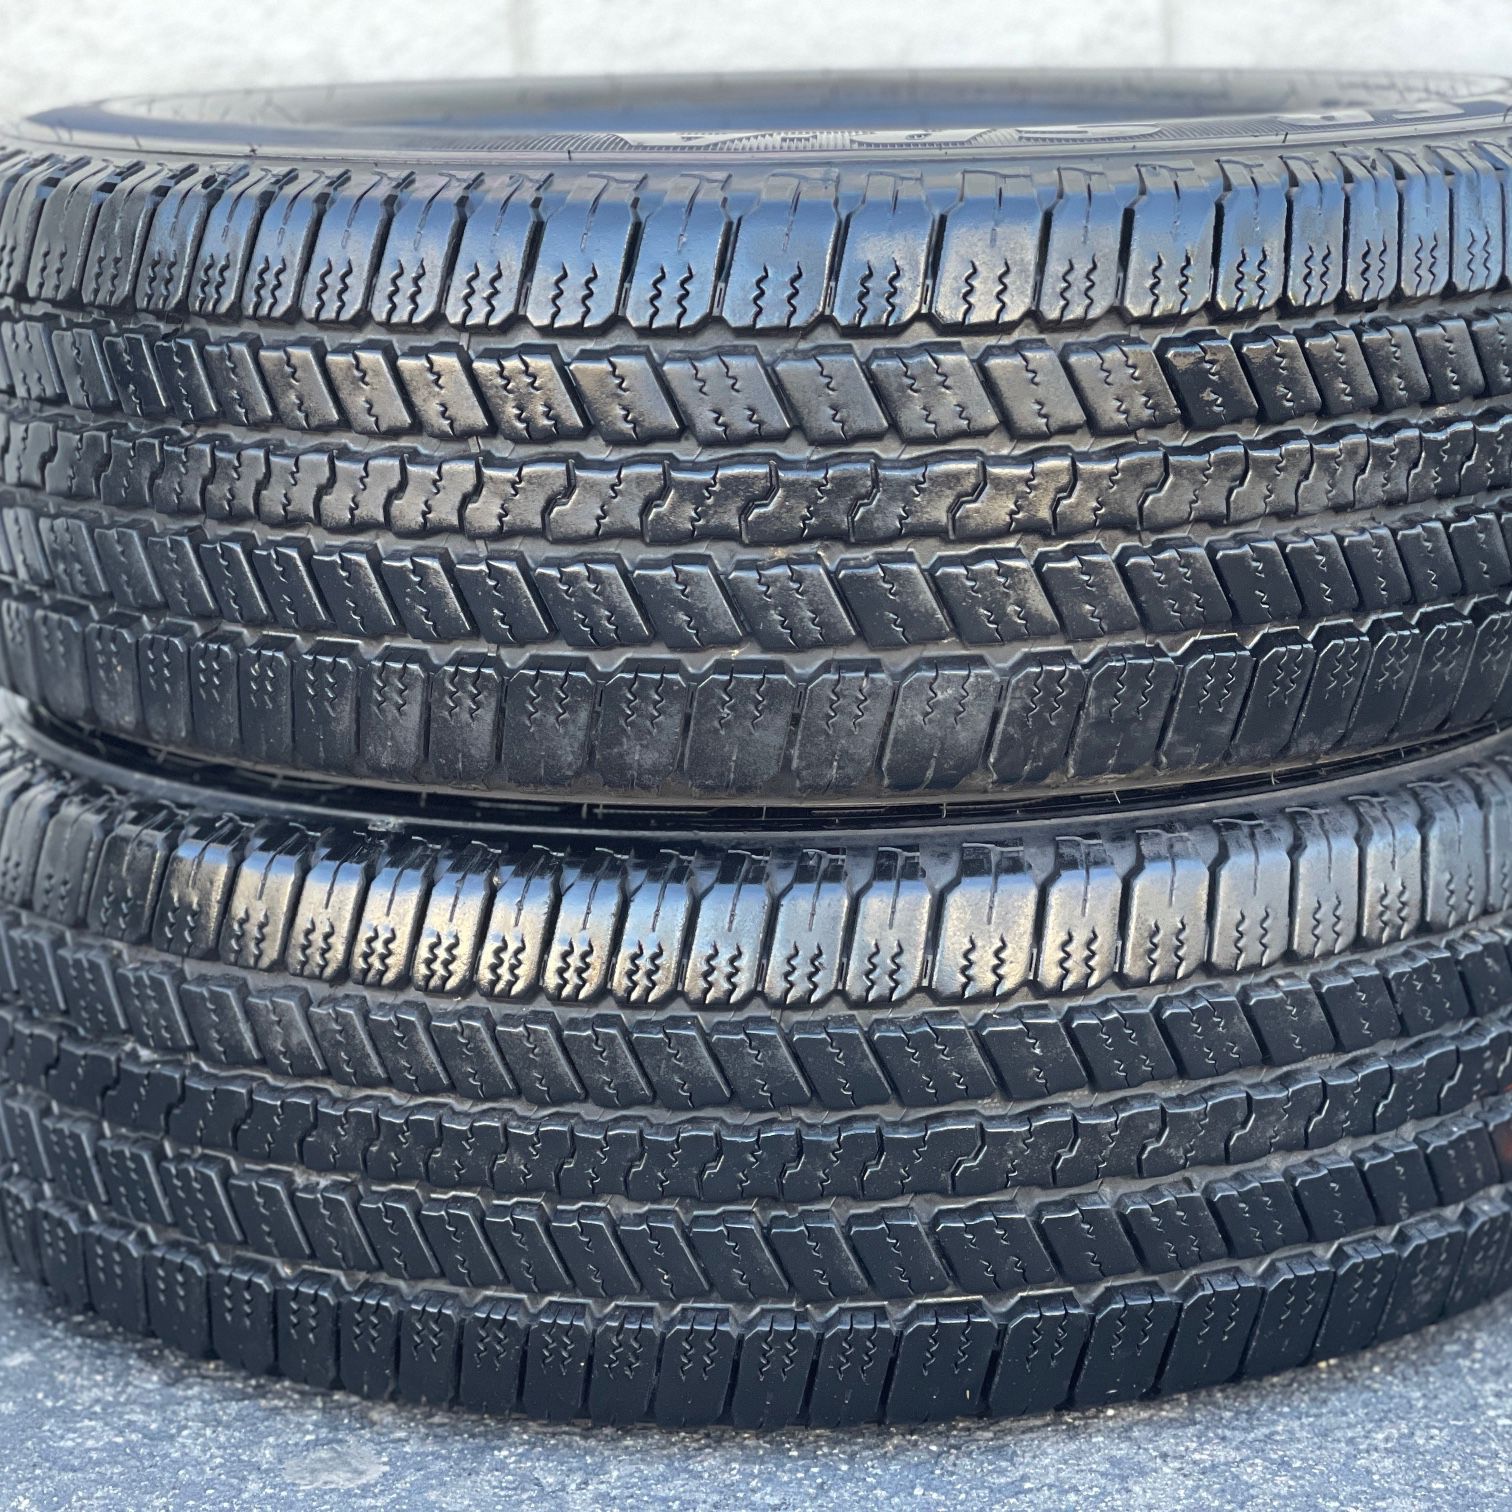 265/60/20 2pcs Goodyear wrangler take offs 90% thread $200 Valley wheels  and tires for Sale in Phoenix, AZ - OfferUp